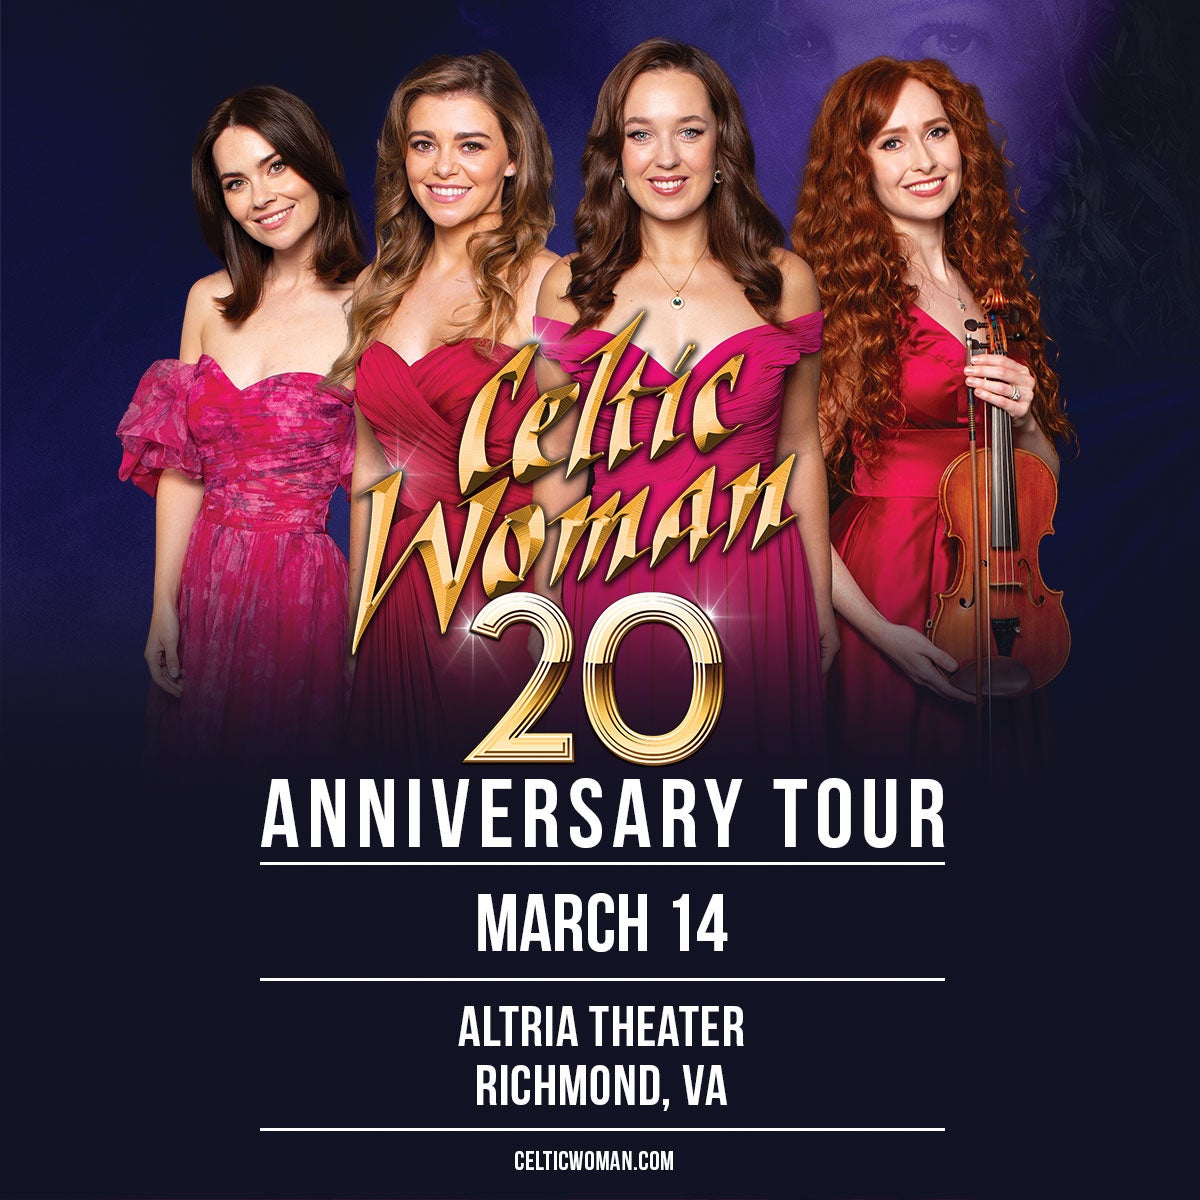 More Info for GRAMMY-NOMINATED MUSIC SENSATION CELTIC WOMAN BRINGS 20TH ANNIVERSARY TOUR TO ALTRIA THEATER ON MARCH 14